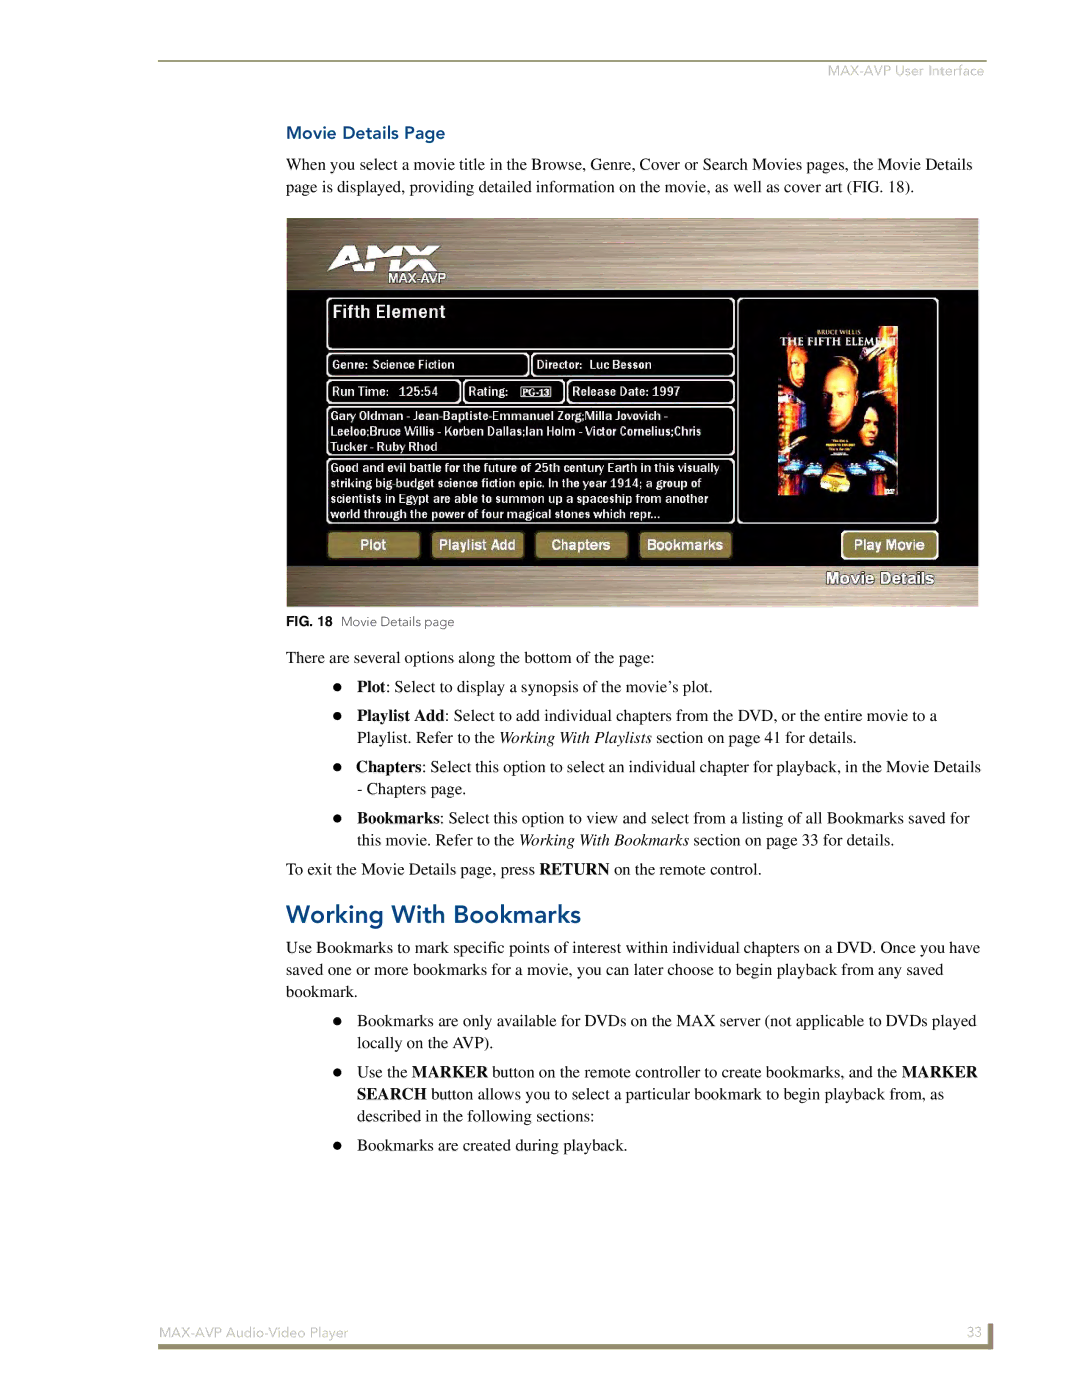 Arkon MAX-AVP manual Working With Bookmarks, Movie Details 